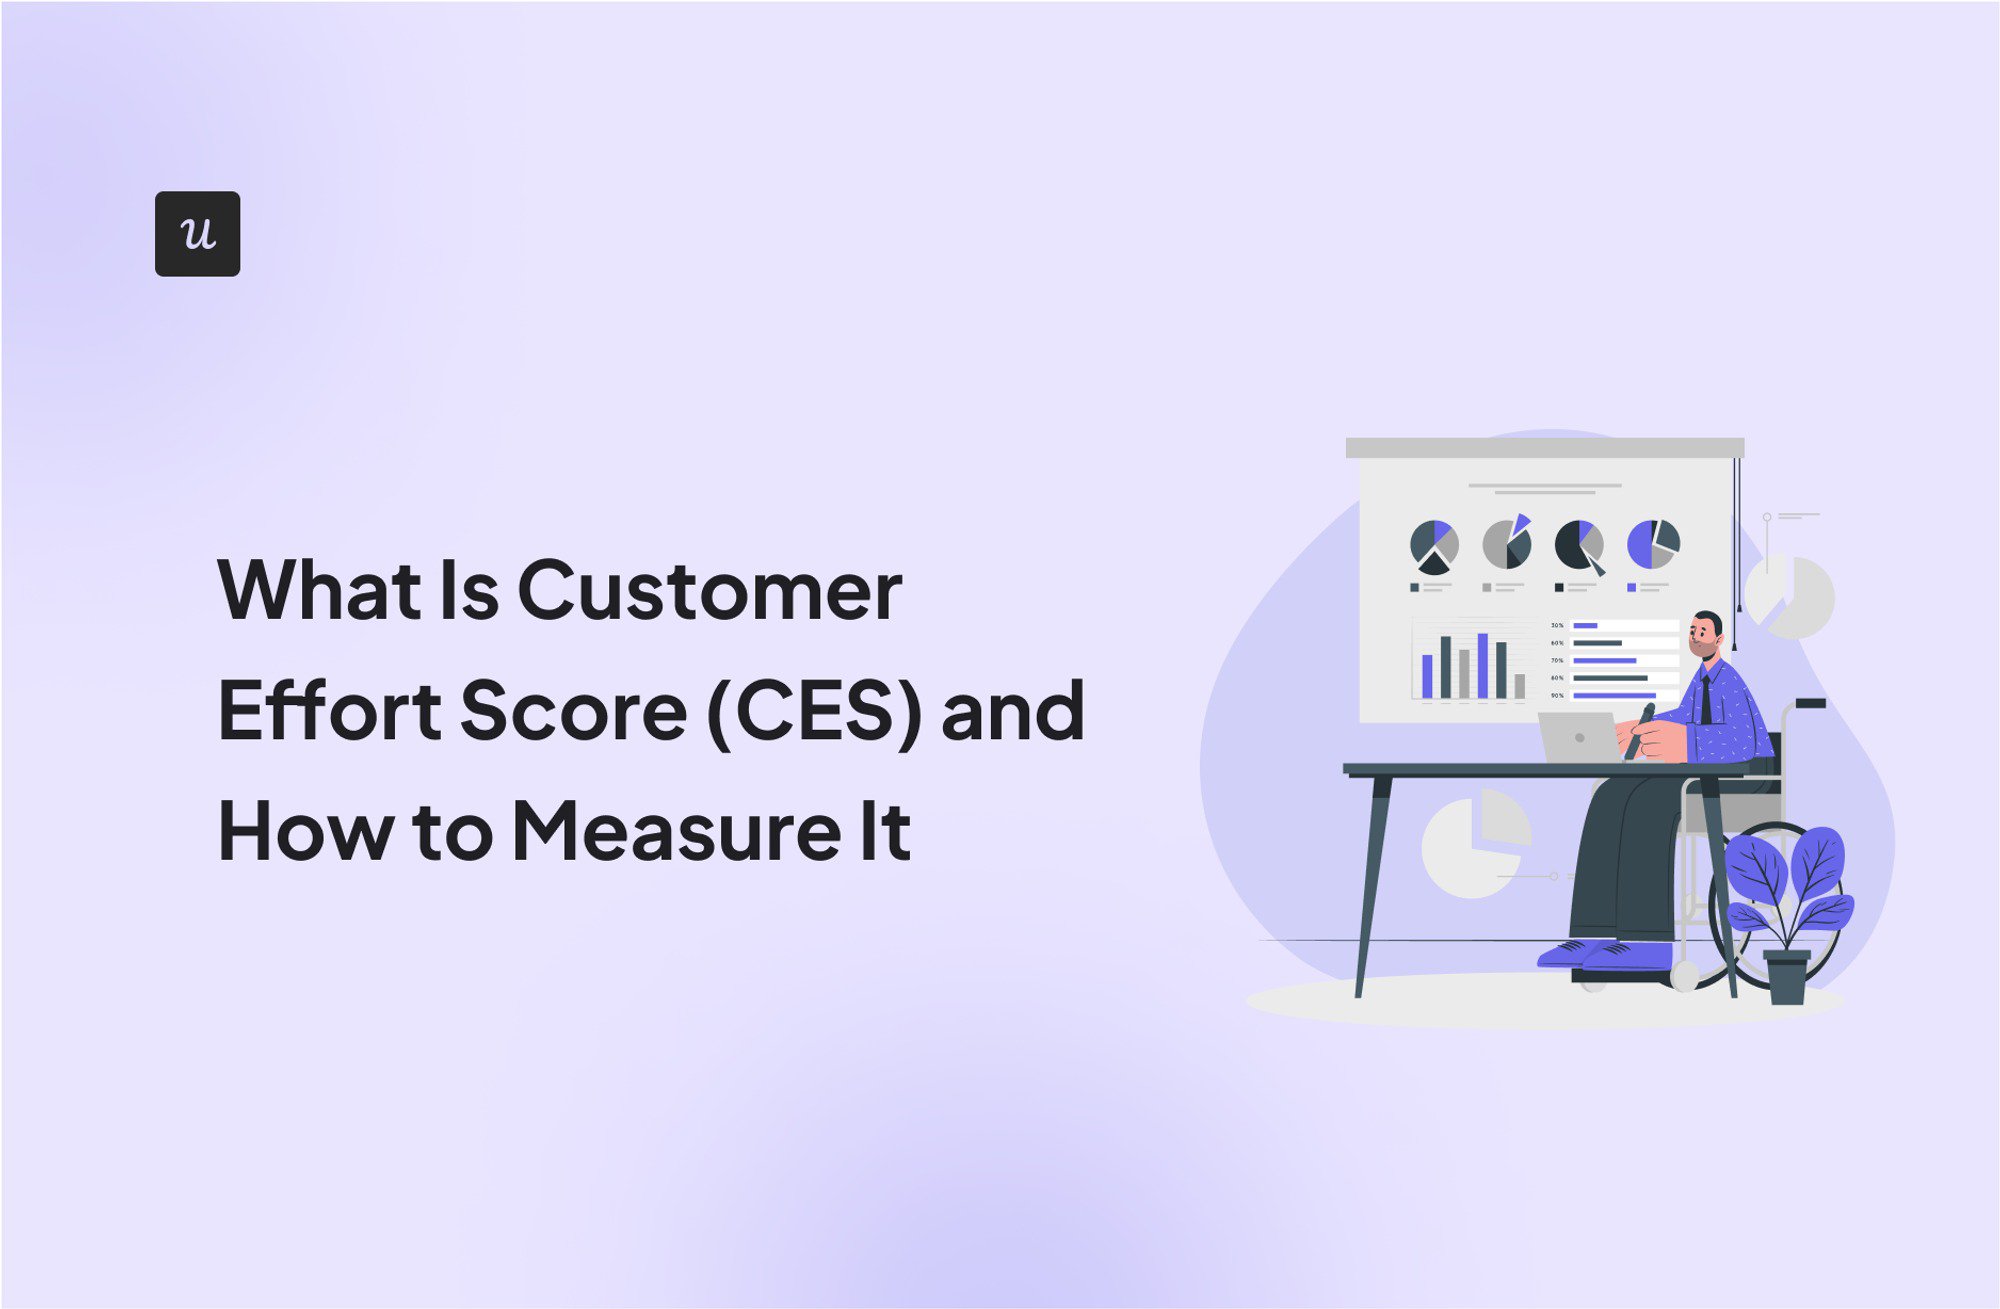 What Is Customer Effort Score (CES) and How to Measure It cover